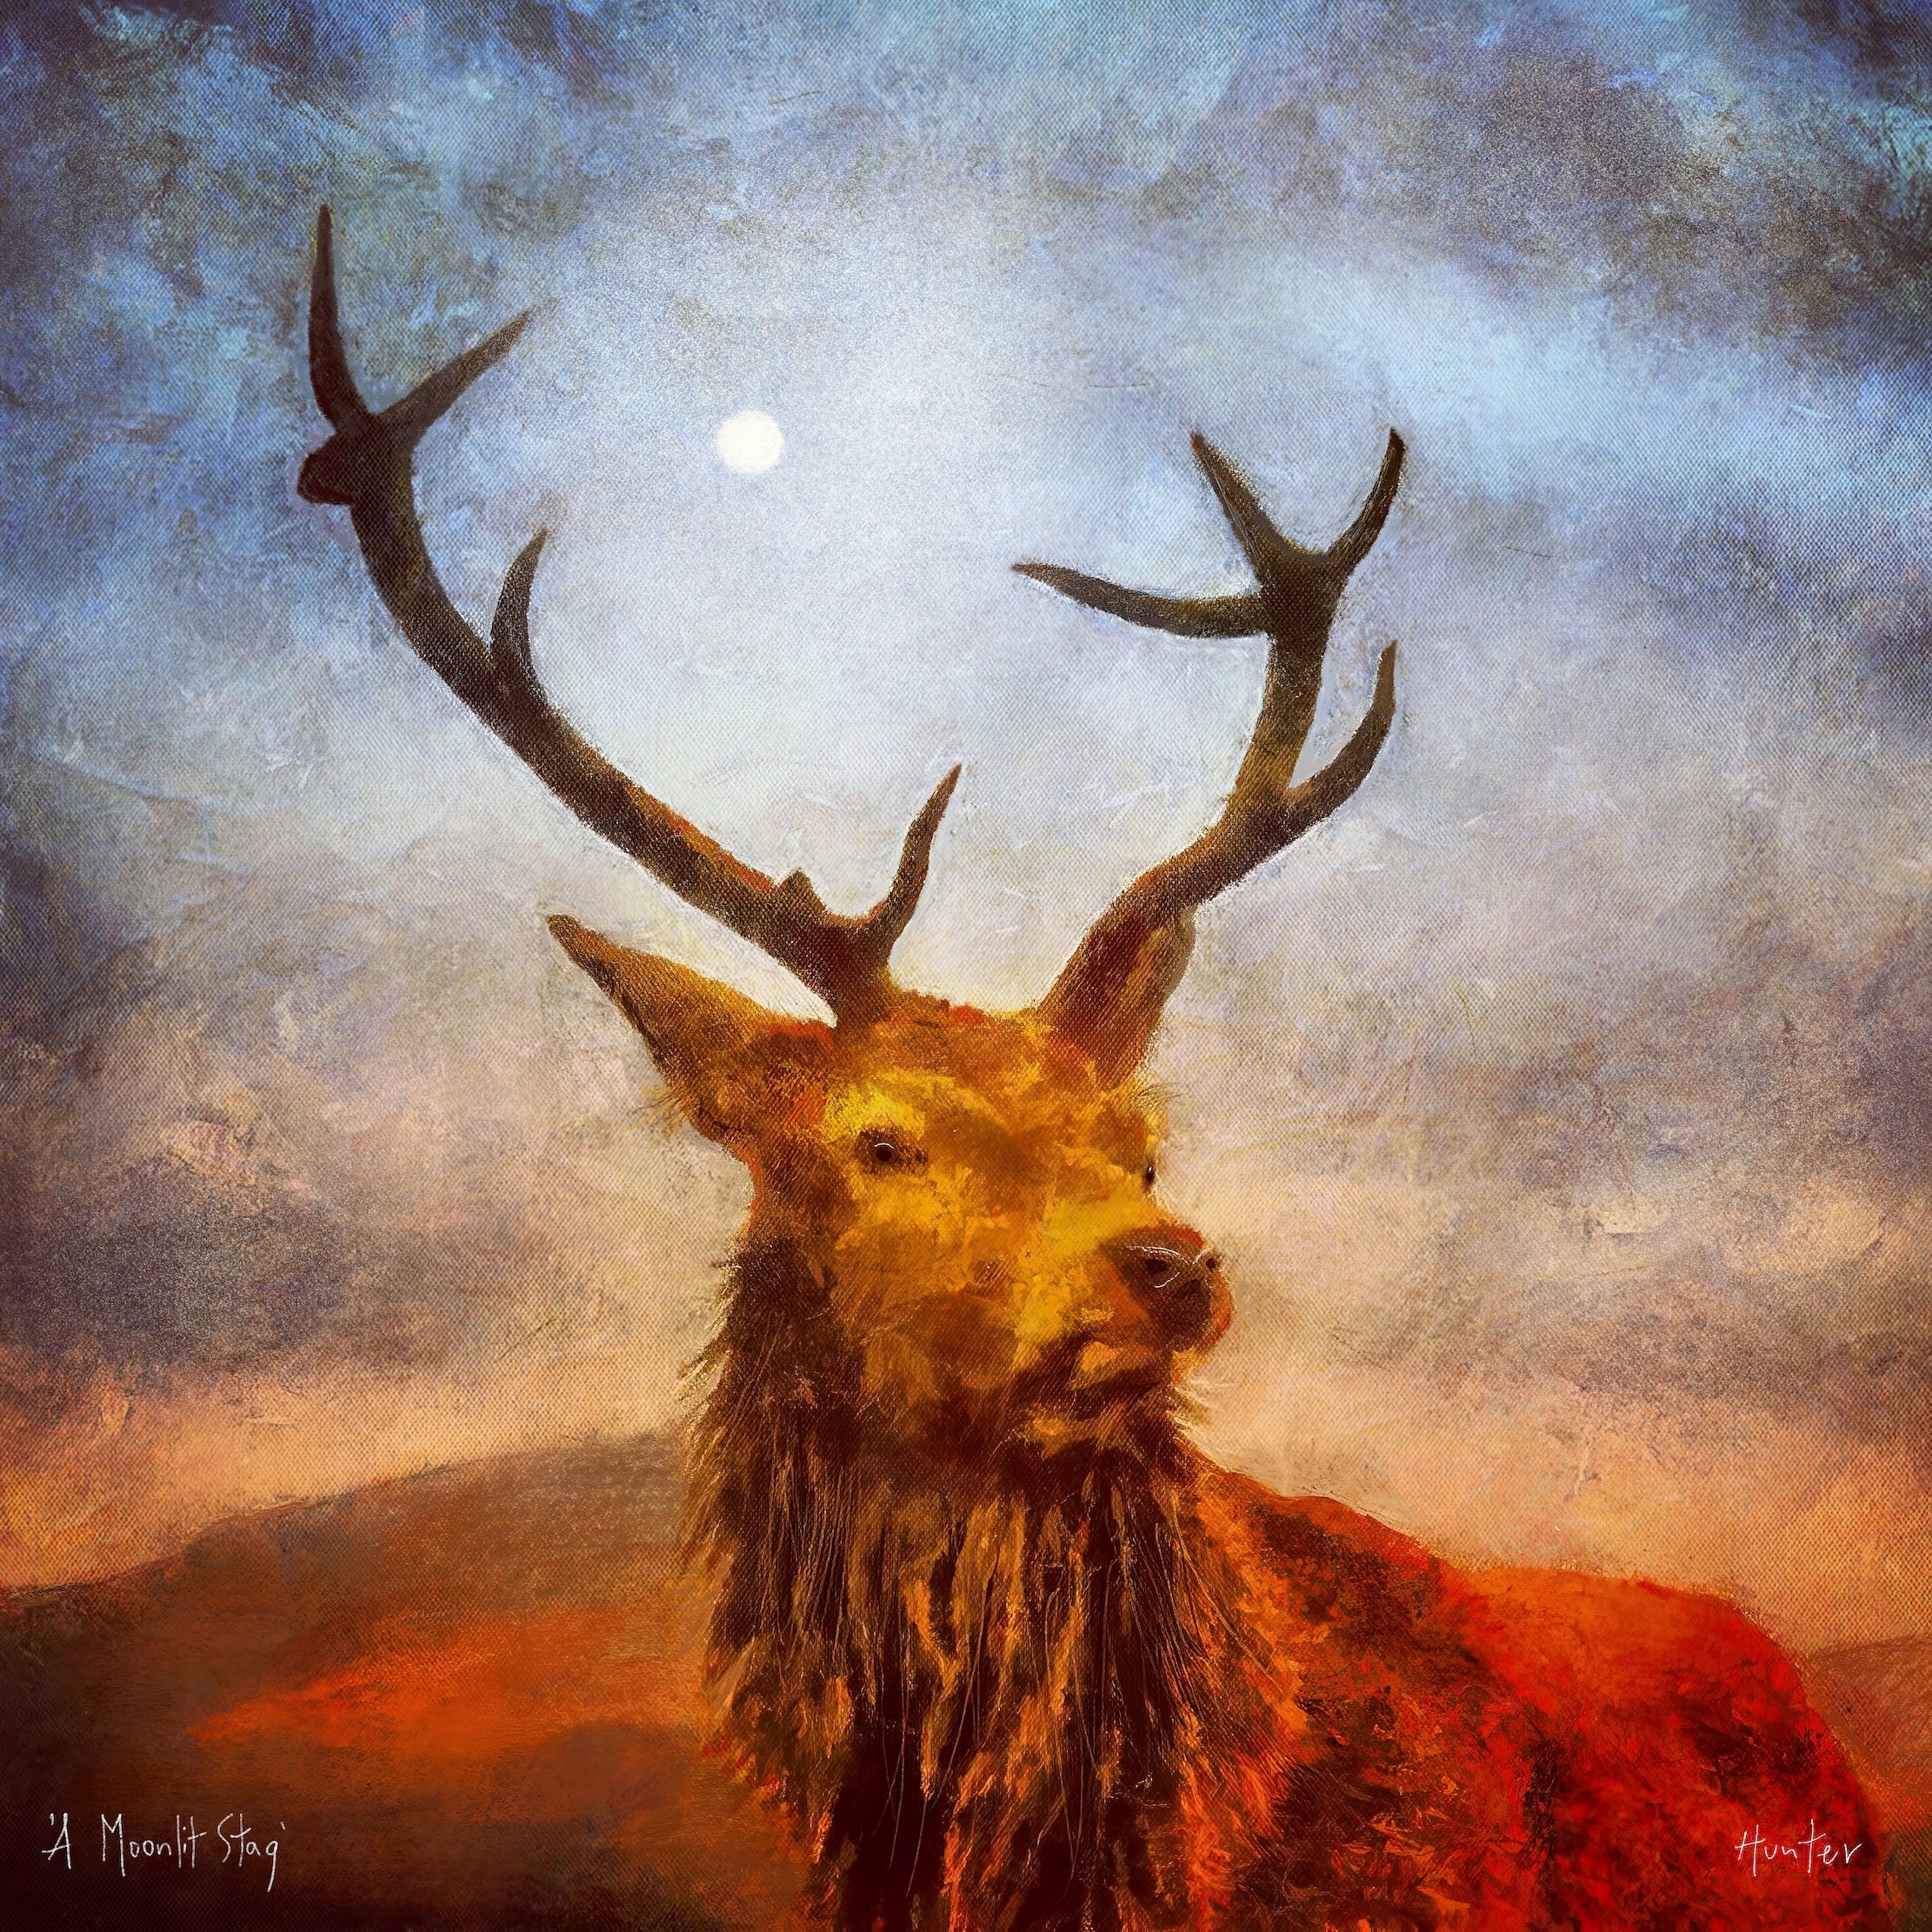 A Moonlit Highland Stag | Scotland In Your Pocket Art Print-Scotland In Your Pocket Framed Prints-Scottish Highlands & Lowlands Art Gallery-Paintings, Prints, Homeware, Art Gifts From Scotland By Scottish Artist Kevin Hunter